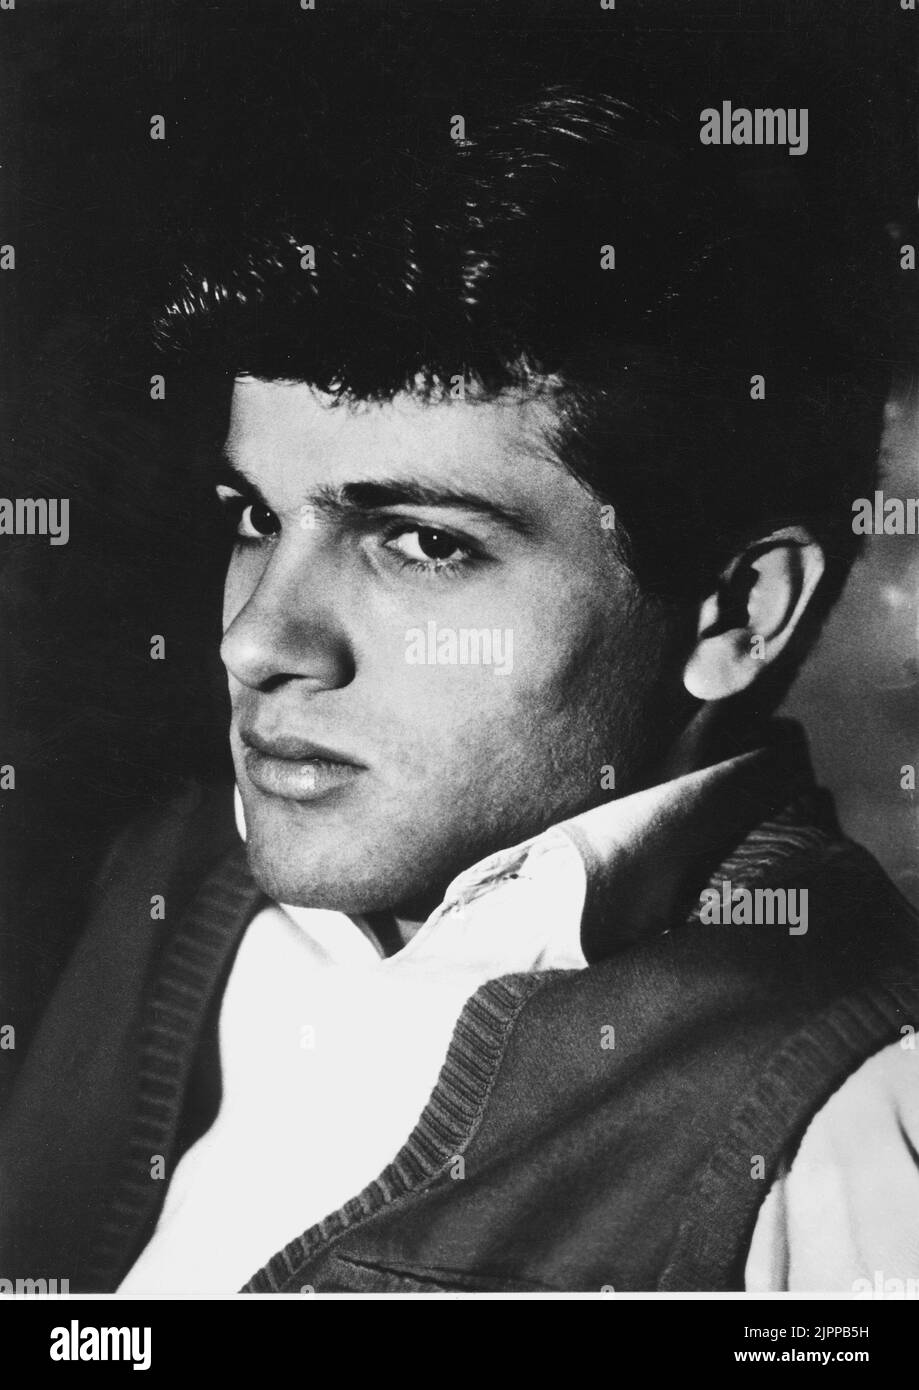 1958 , USA : The singer and movie actor TOMMY SANDS ( Chicago , Ill 27 august 1937 ) , married to Nancy Sinatra from 1960 to 1965 - CINEMA - POP MUSIC - MUSICA - rock n roll - anni cinquanta - 50's - '50  ----  Archivio GBB Stock Photo